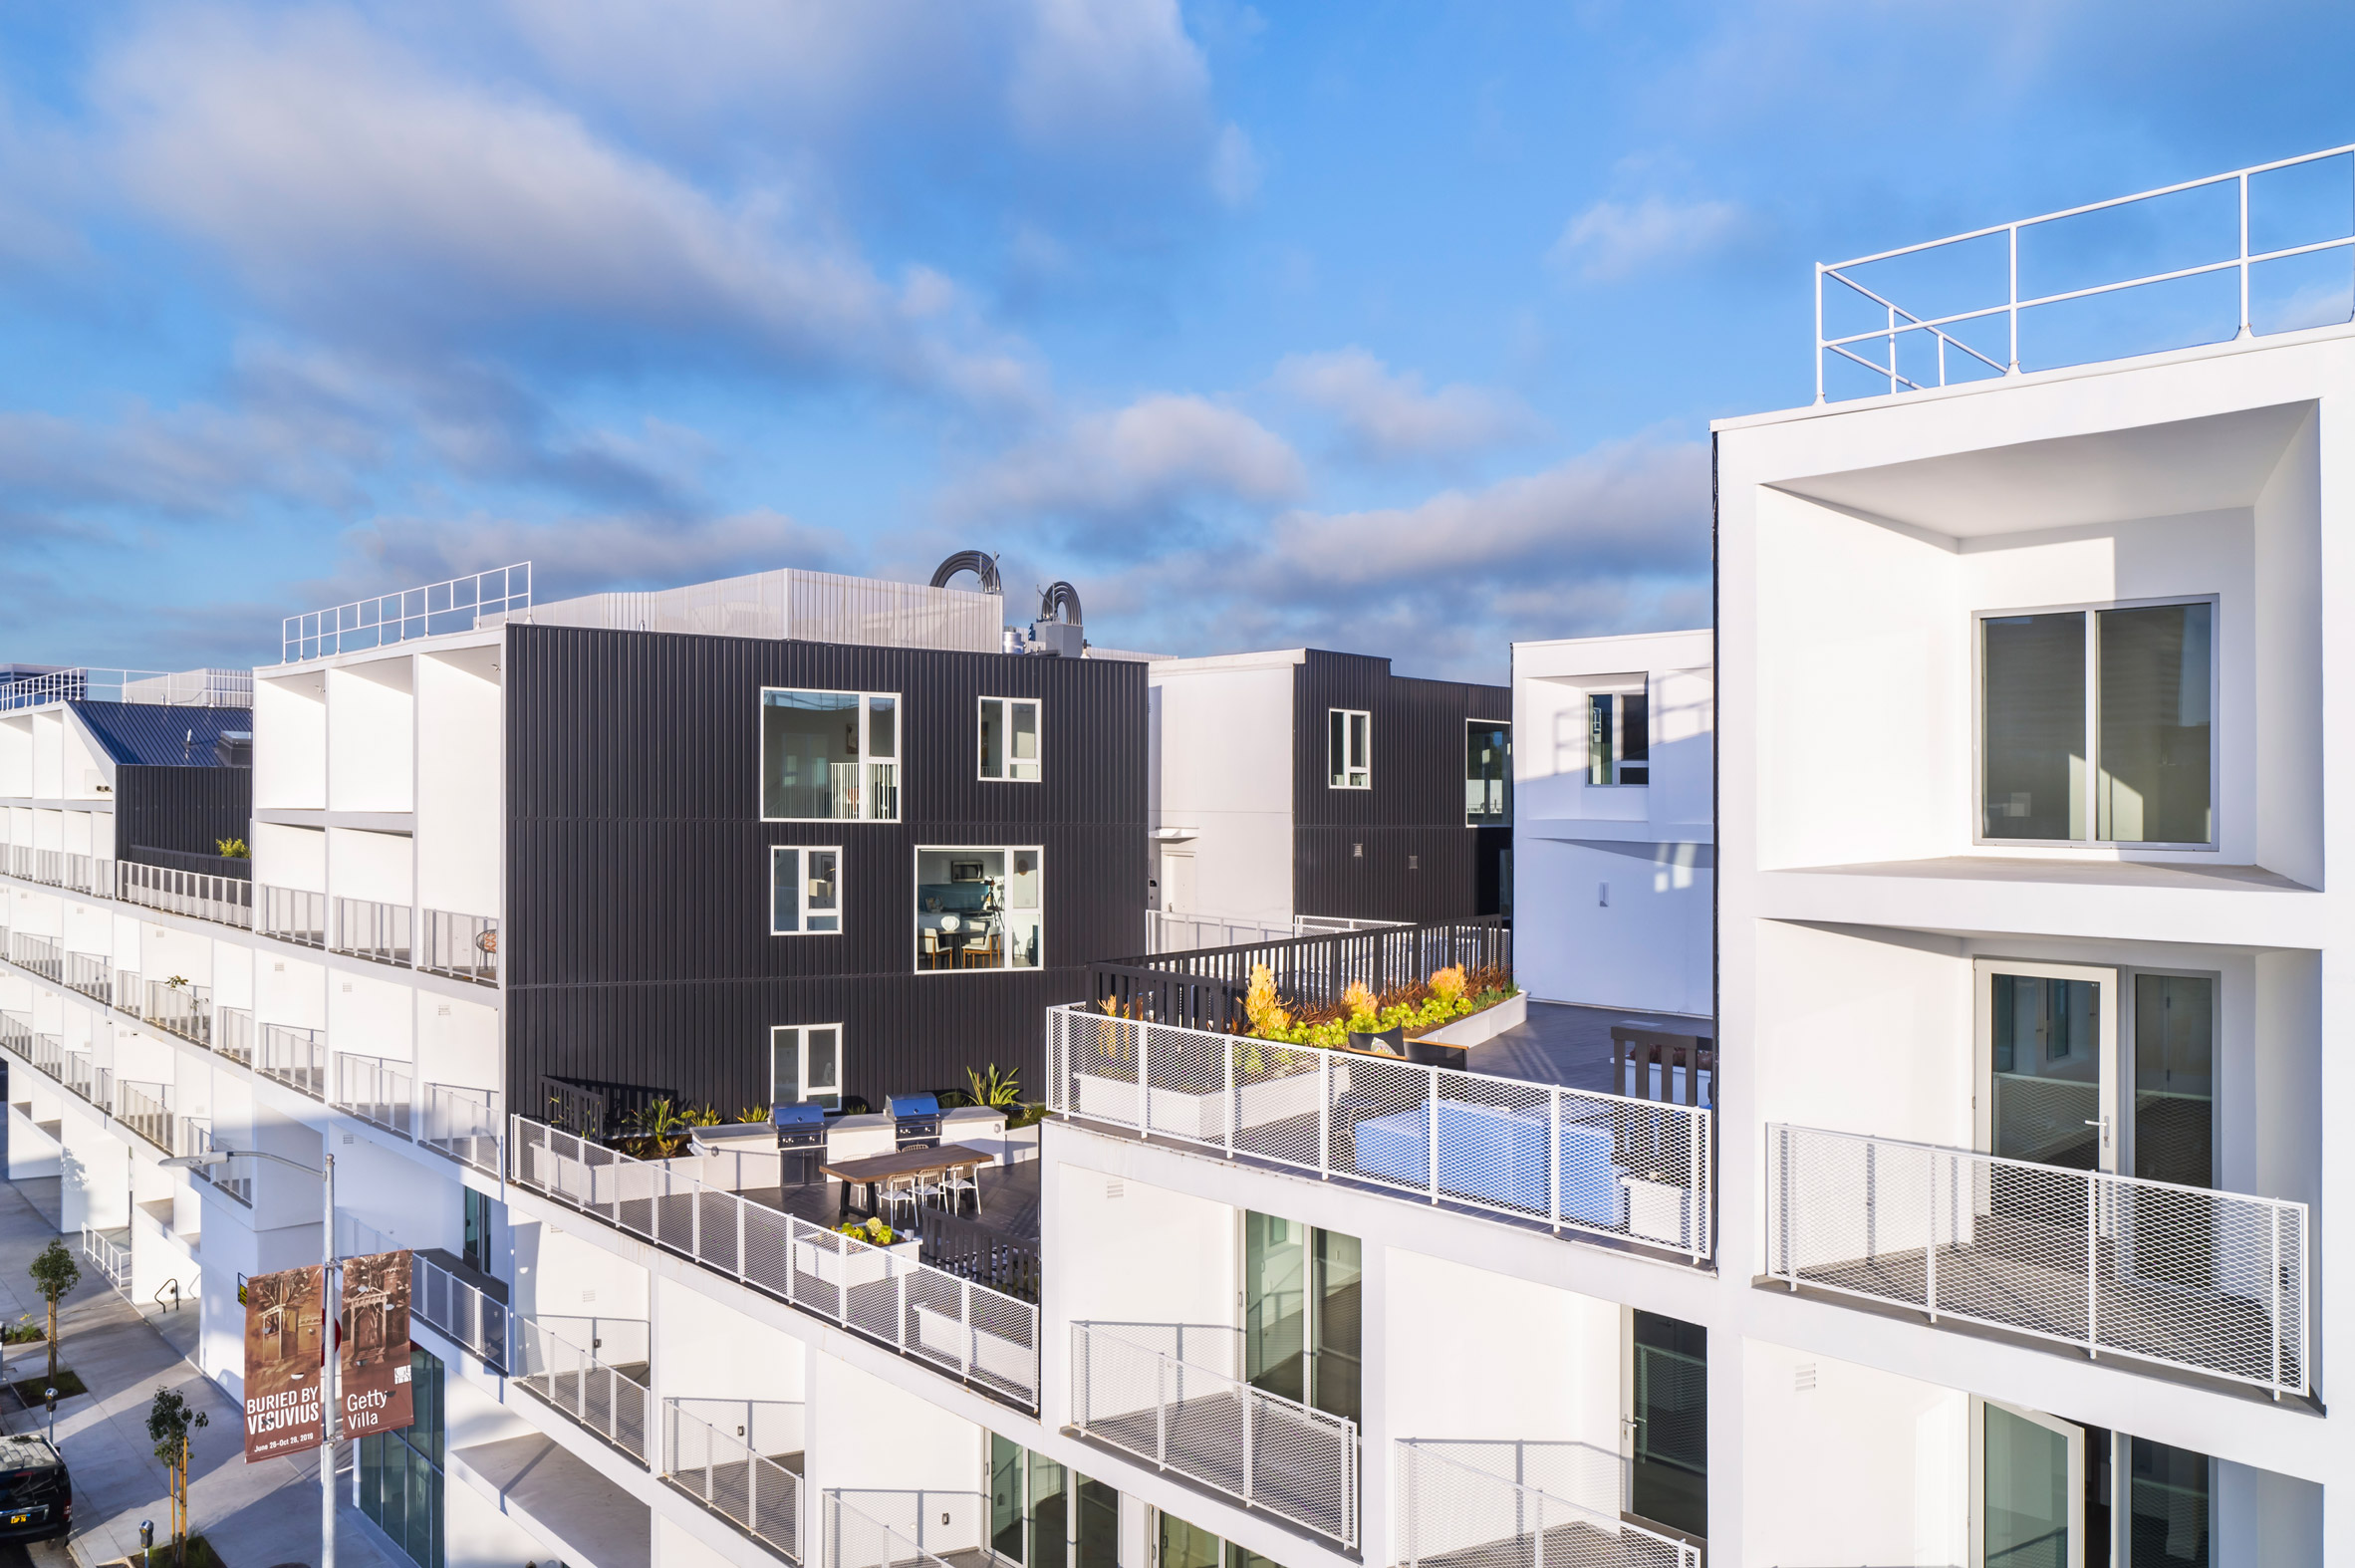 LOHA creates Westgate1515 student housing complex in Los Angeles